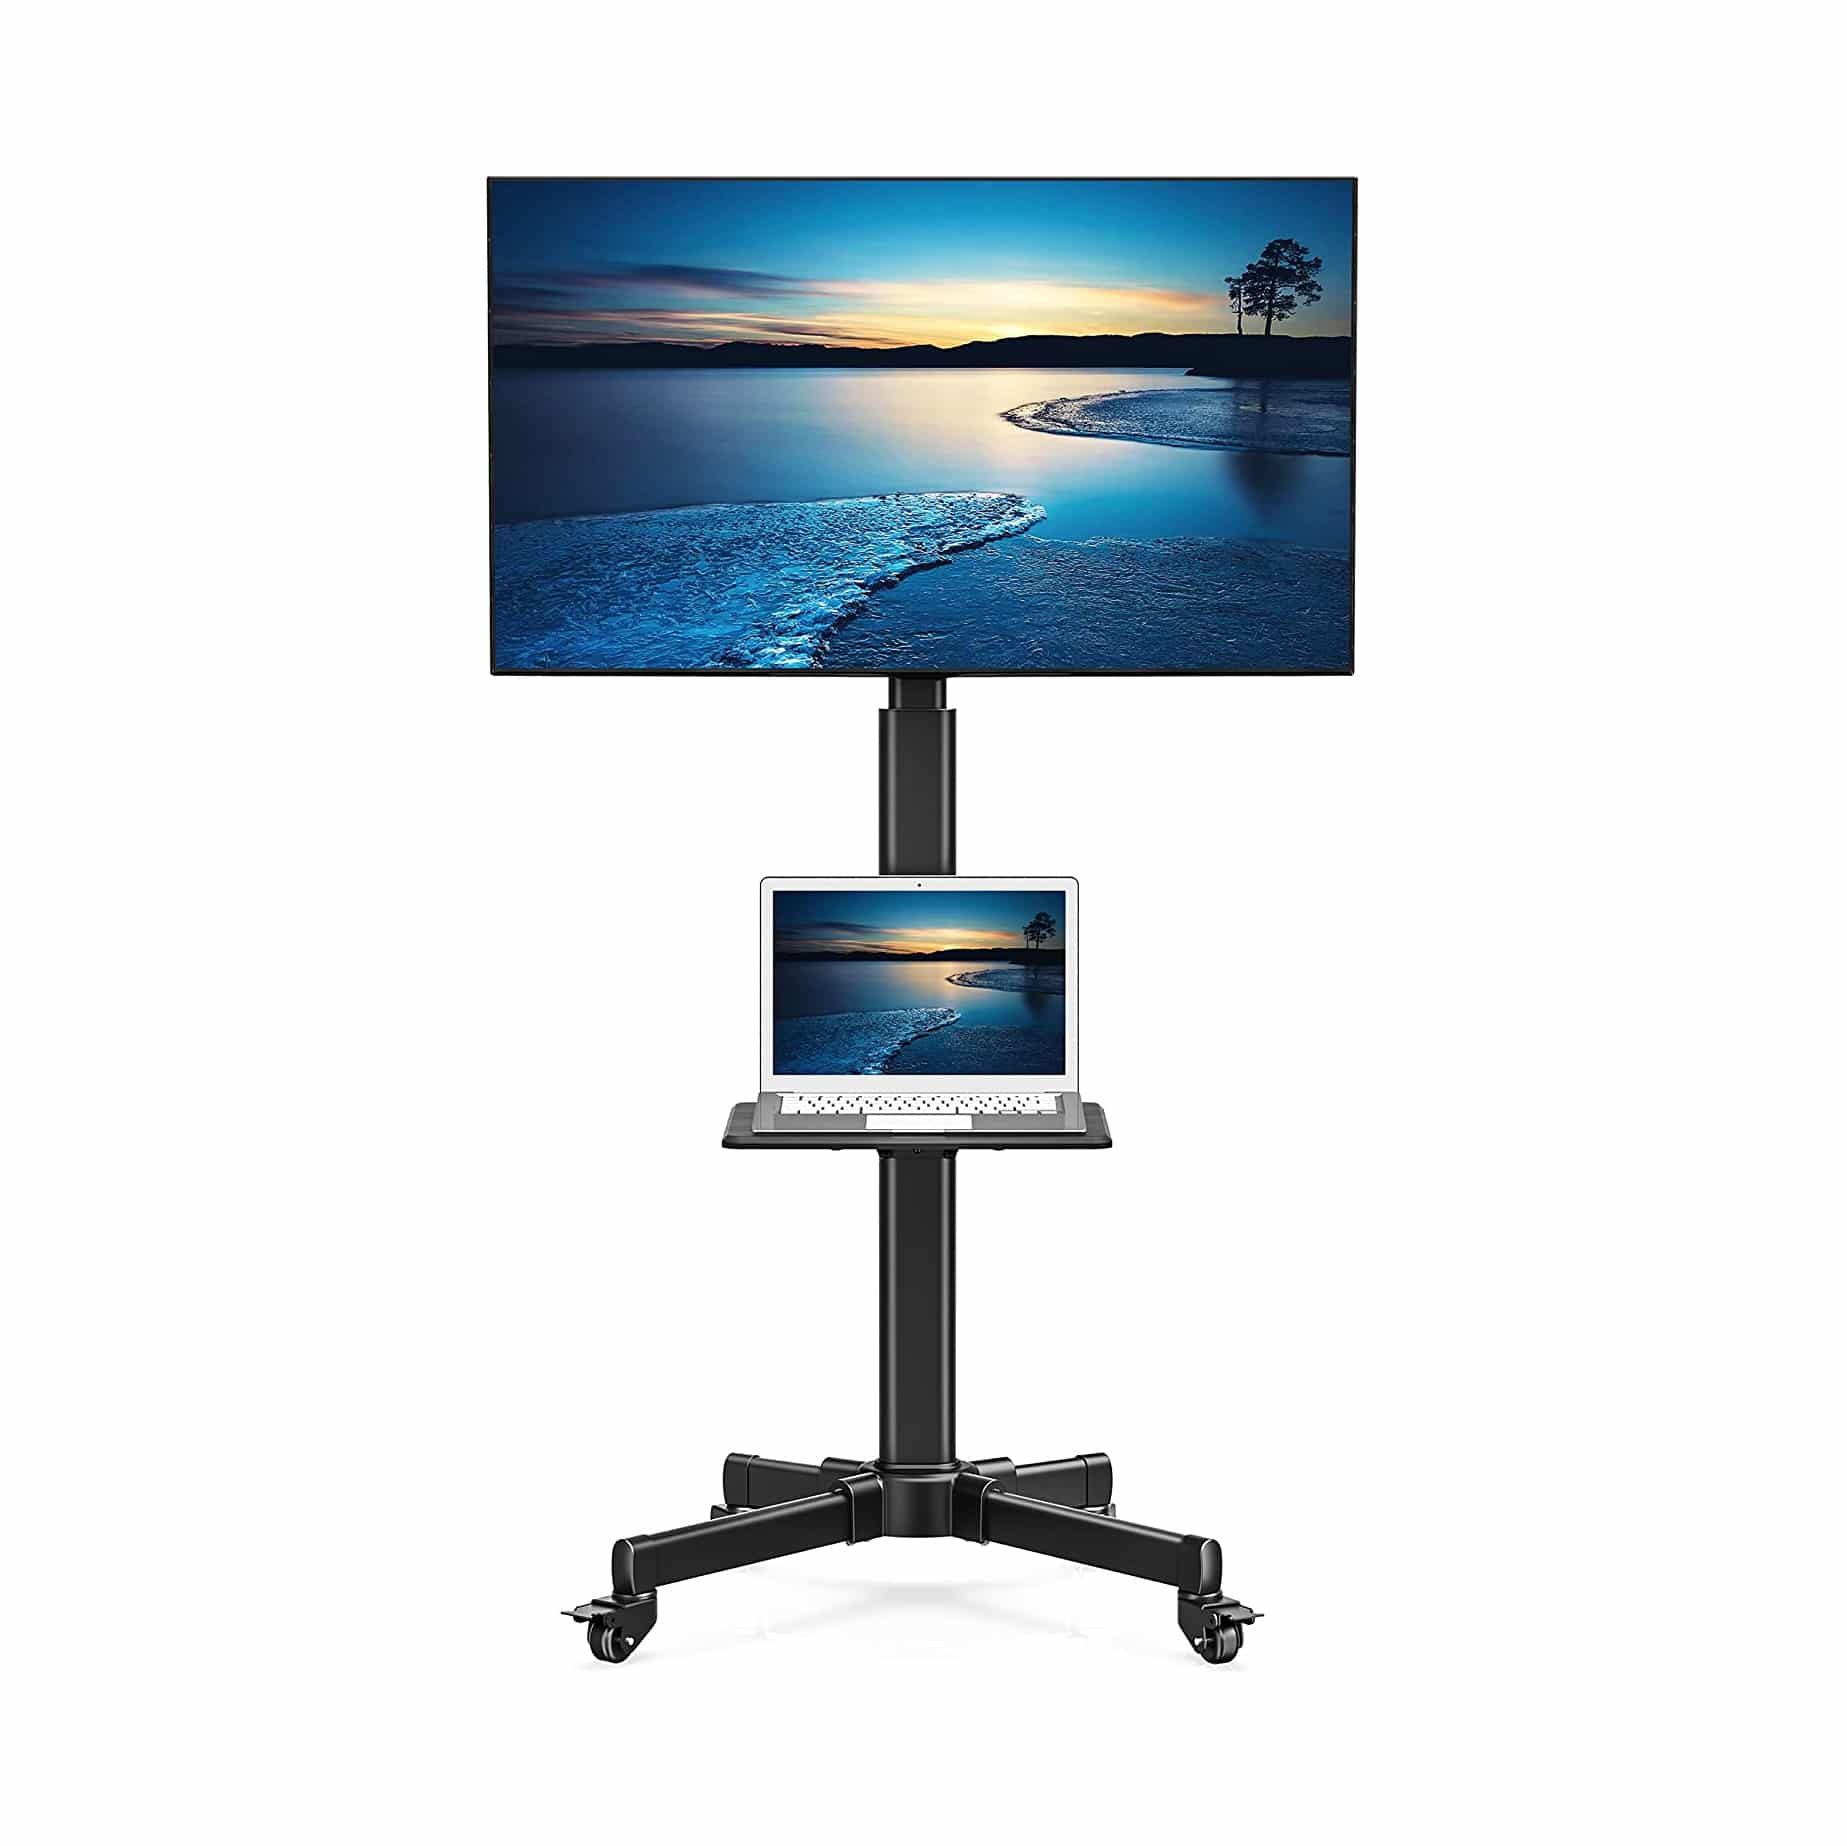 Top 10 Best Portable Tv Stands In 2023 Reviews | Buyer's Guide Inside Foldable Portable Adjustable Tv Stands (View 13 of 20)